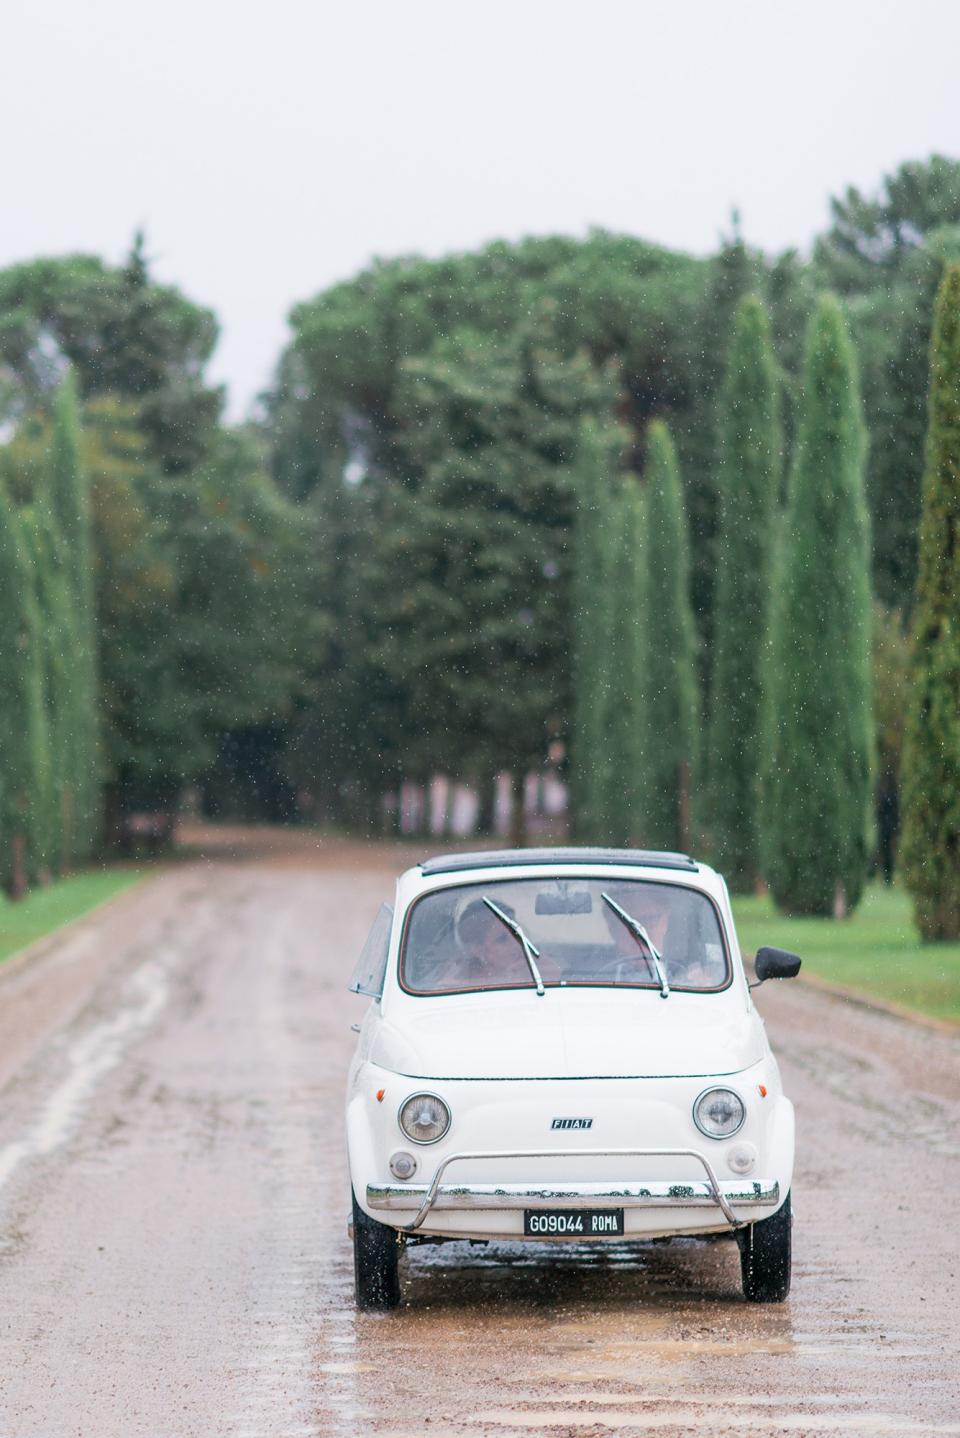 That’s Amore: This Couple Had a Romantic, Rainy Wedding at a Tiny Chapel in Tuscany